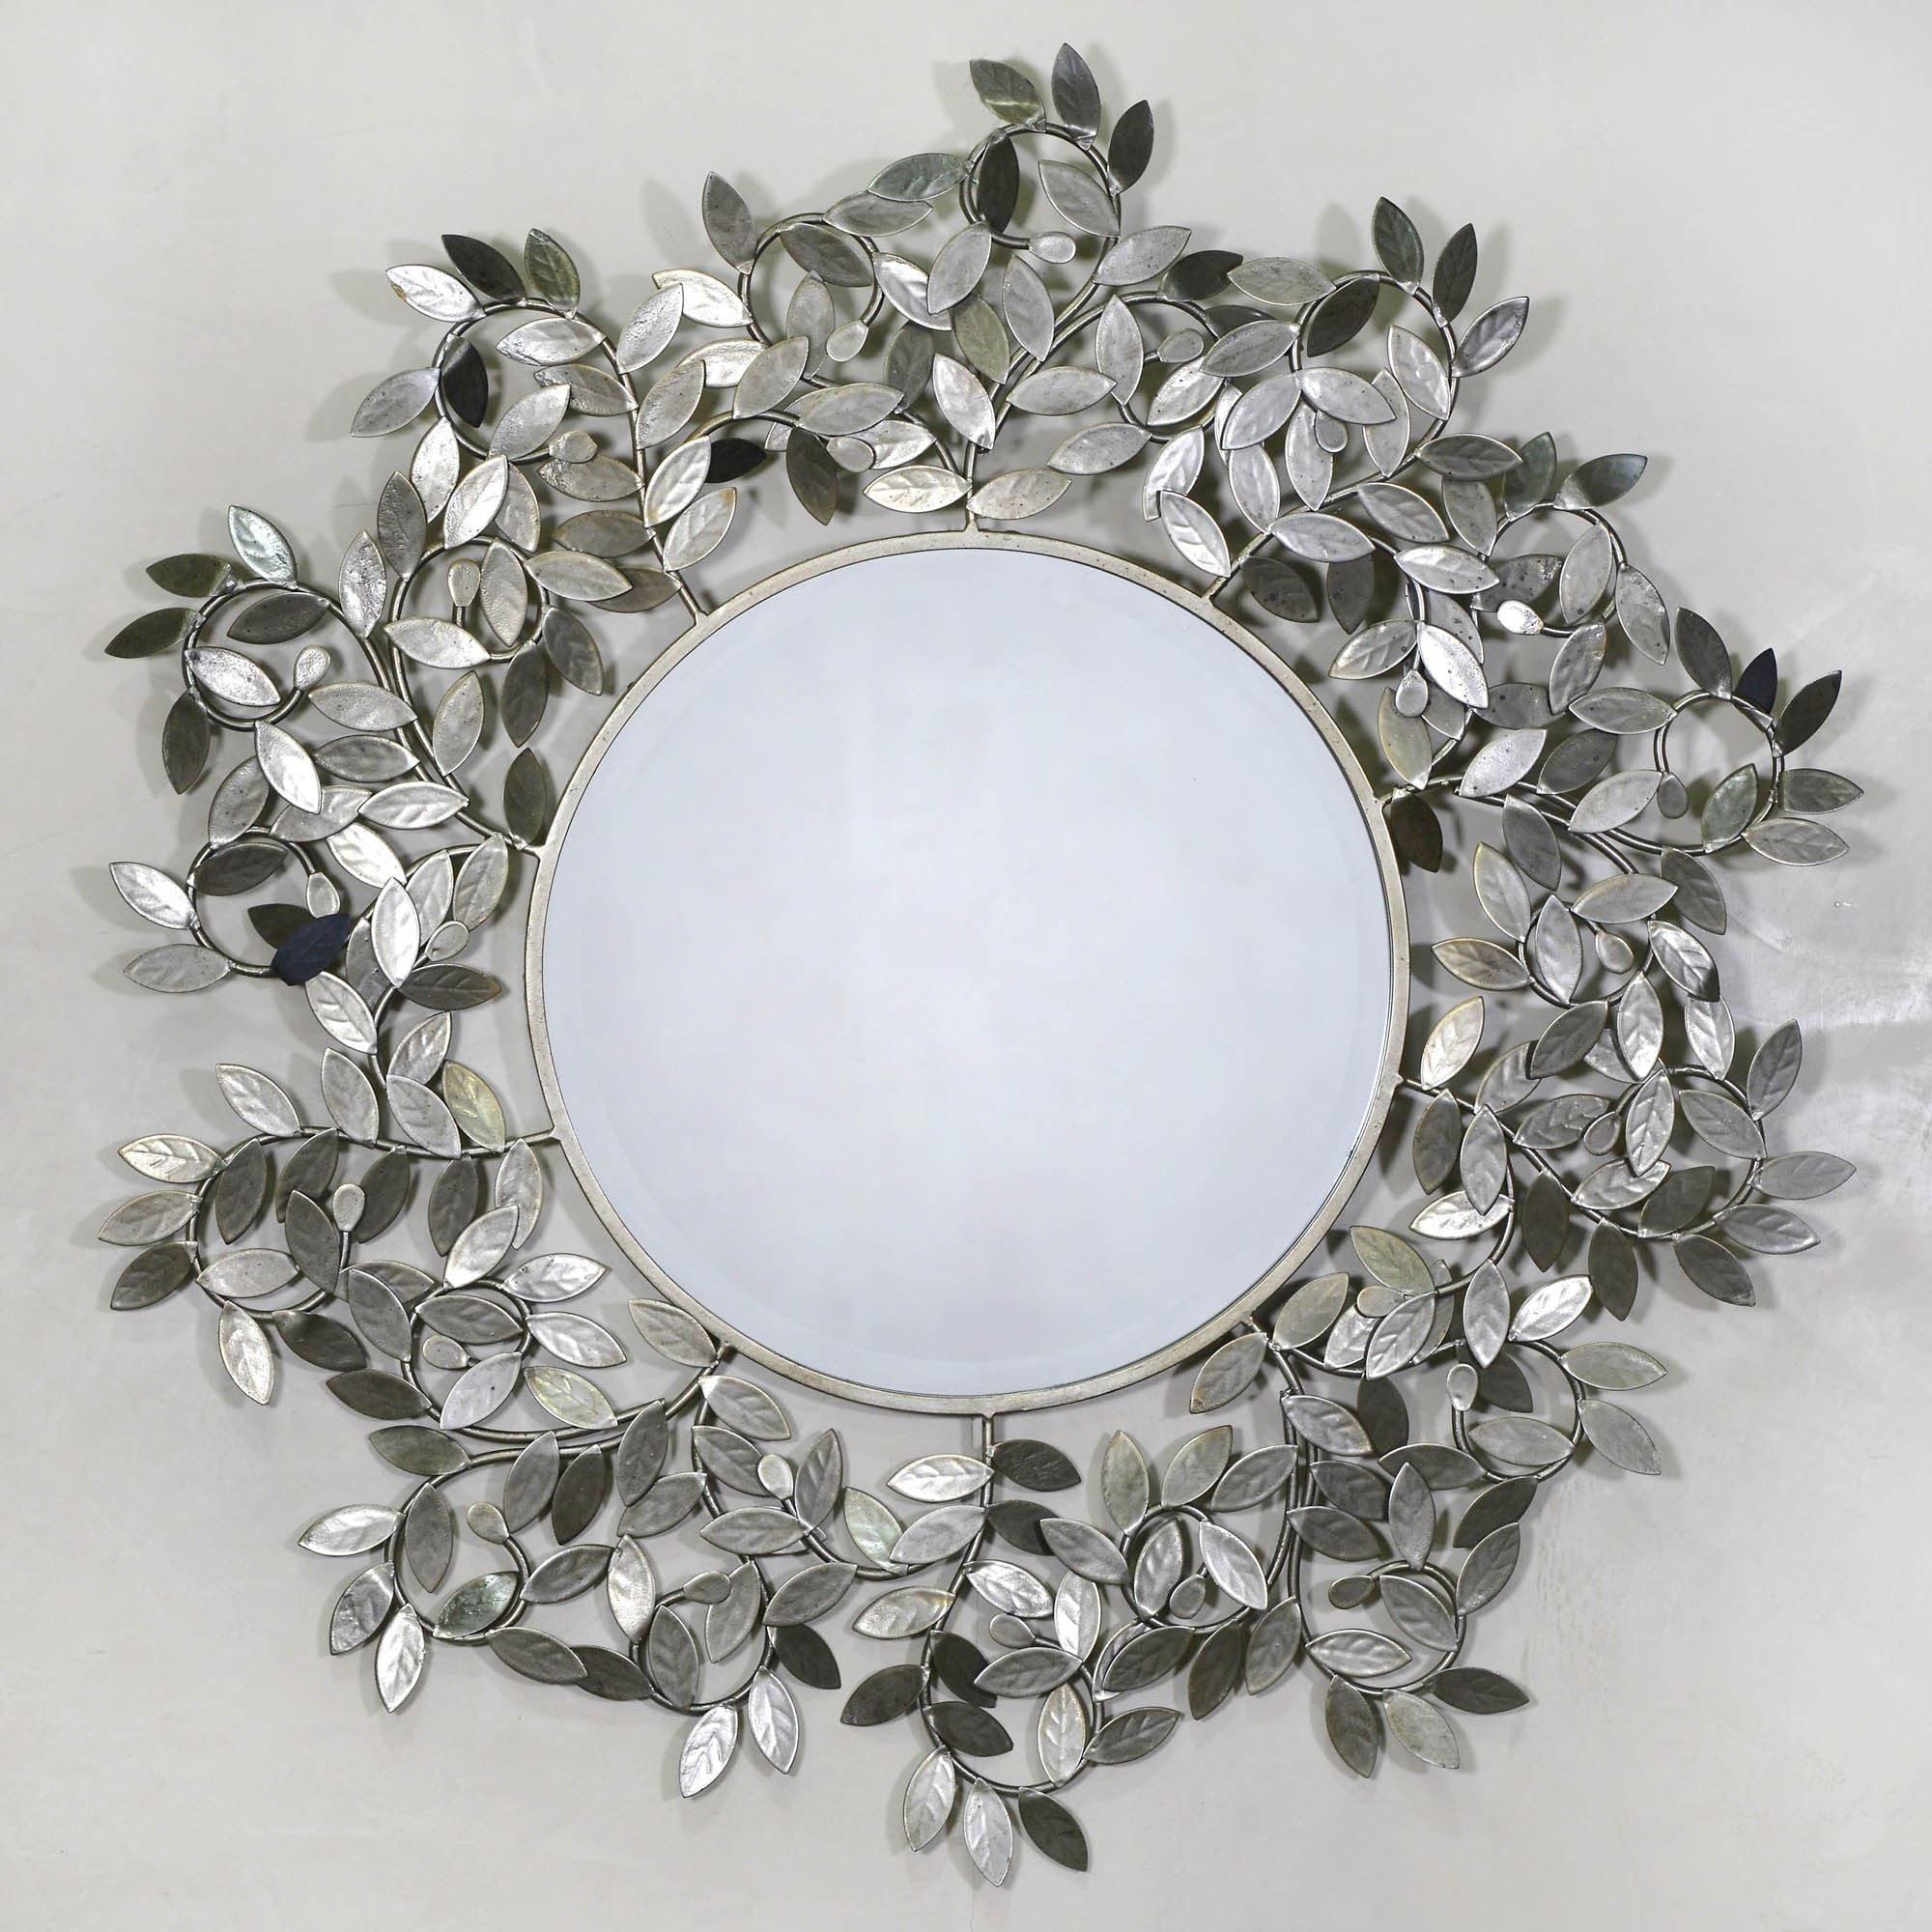 Antique Silver Rose Leaf Metal Framed Wall Mirror | Contemporary Mirror With Brass Iron Framed Wall Mirrors (View 13 of 15)